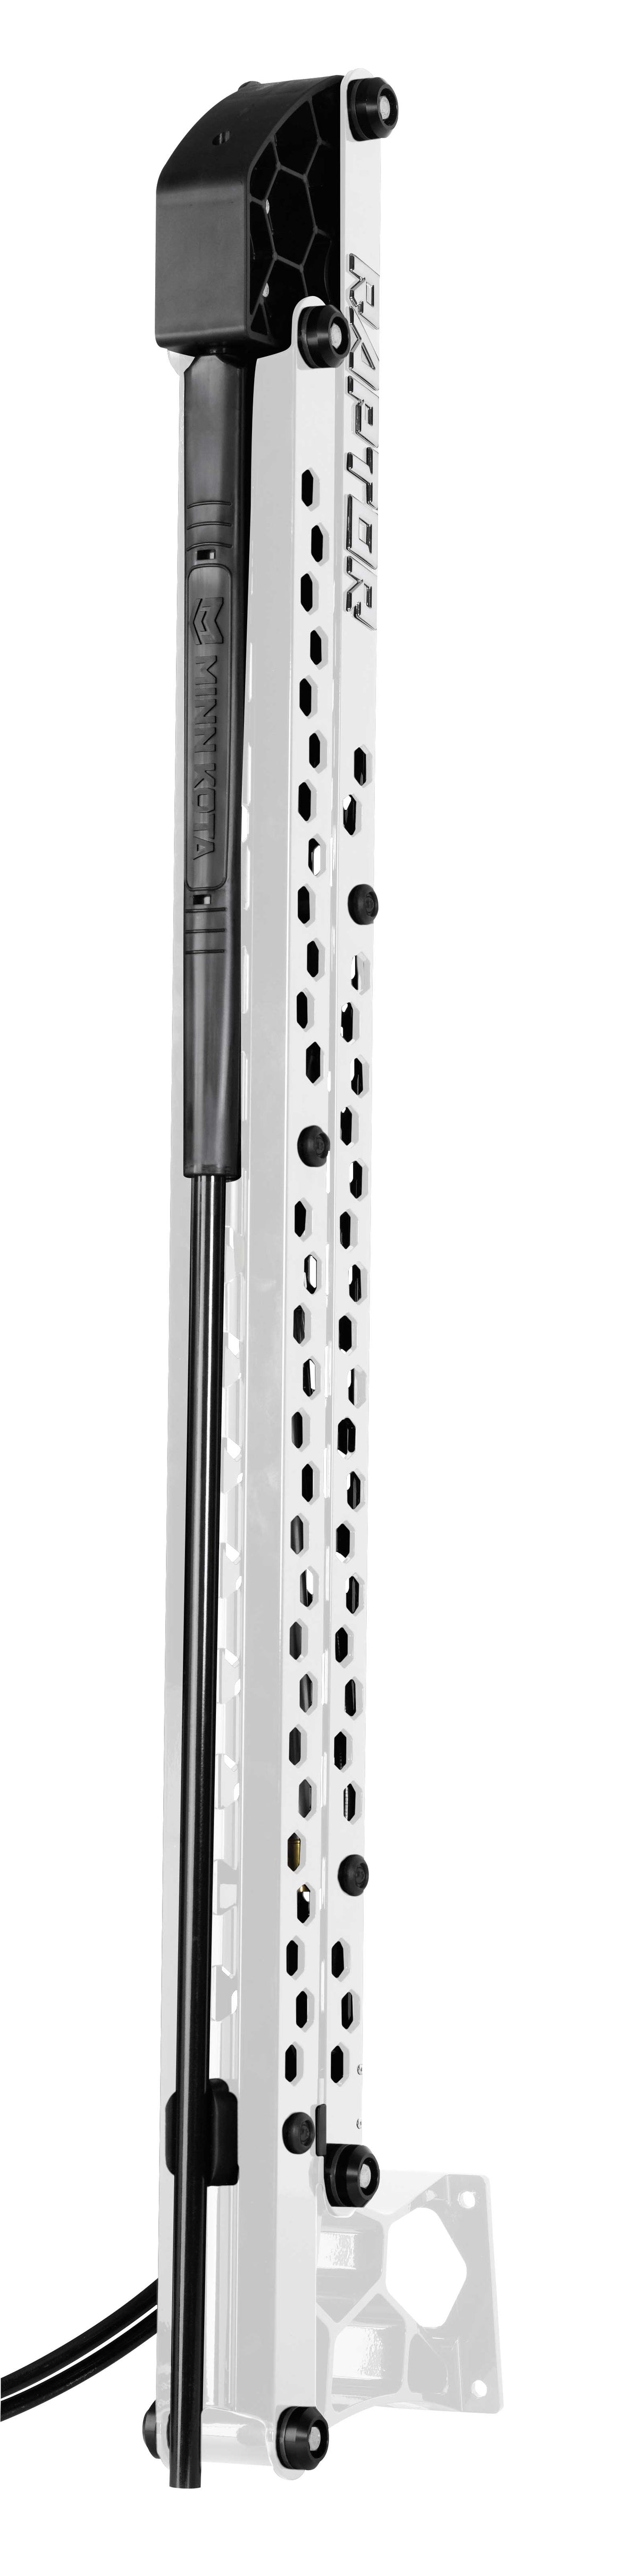 Minn Kota 1810631 Raptor Shallow Water Anchor with Active Anchoring - 10', White